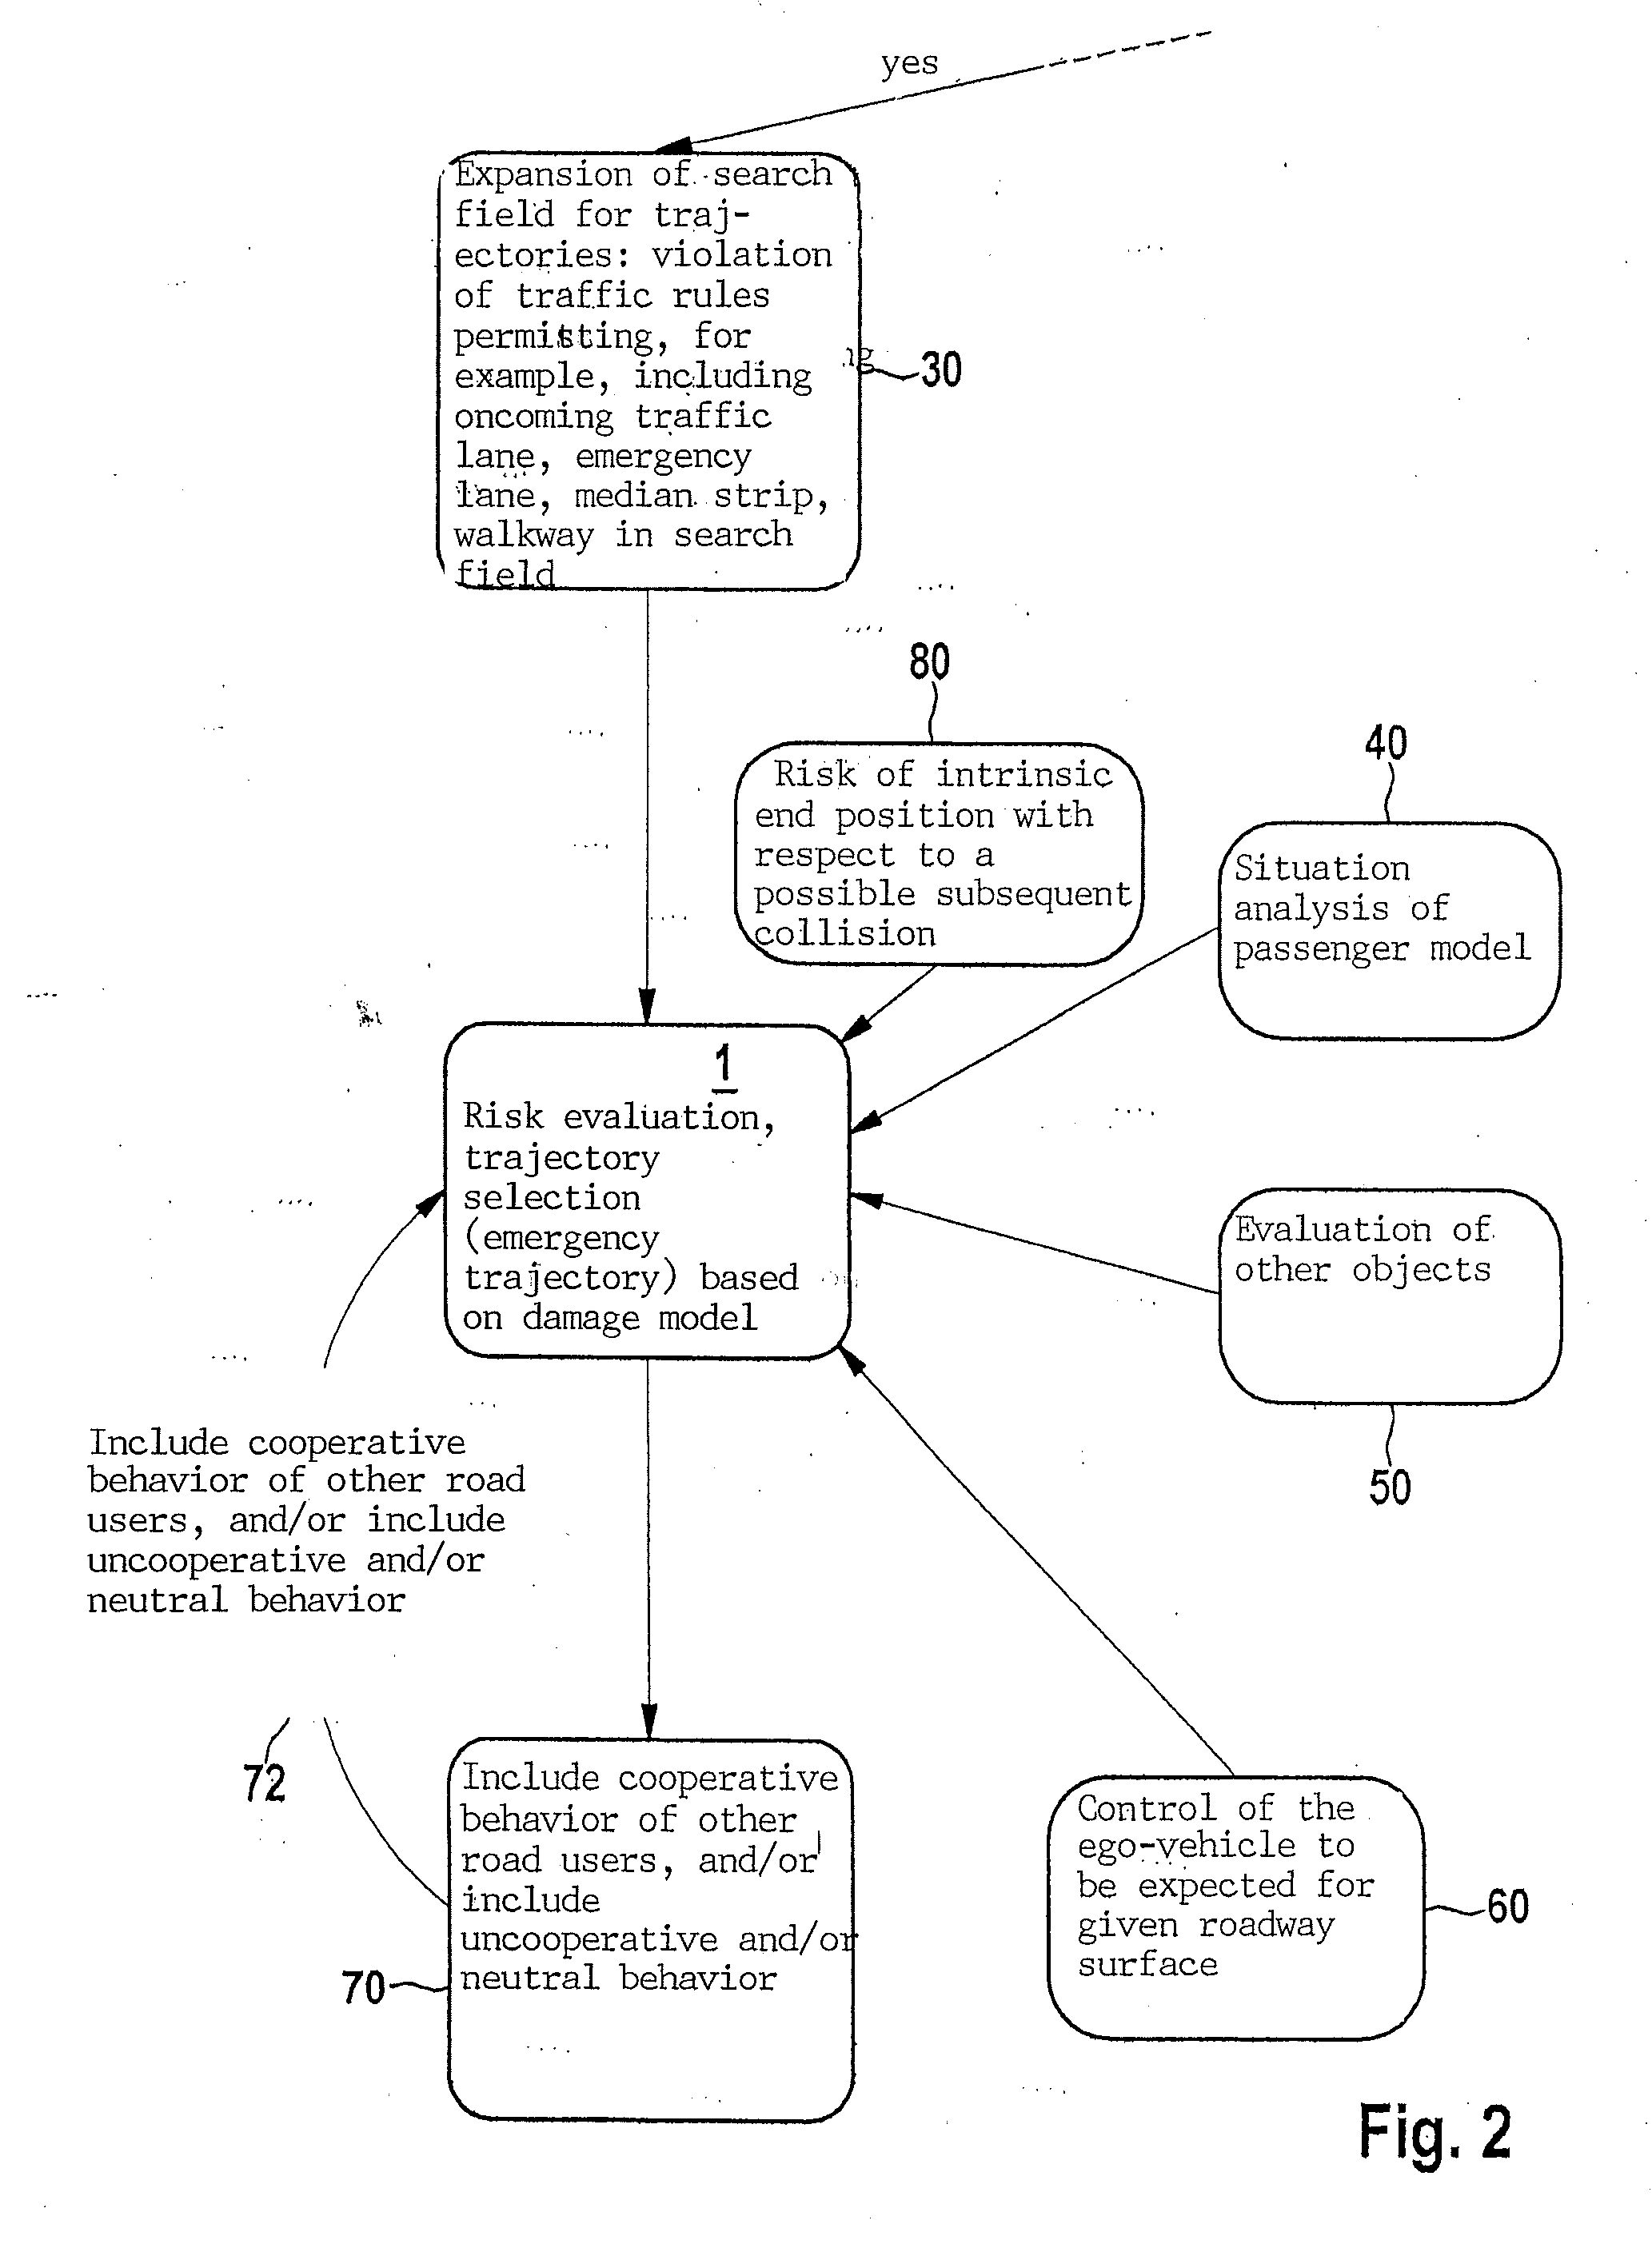 Method for ascertaining an emergency trajectory and method for partially automated or automated driving of an ego-vehicle